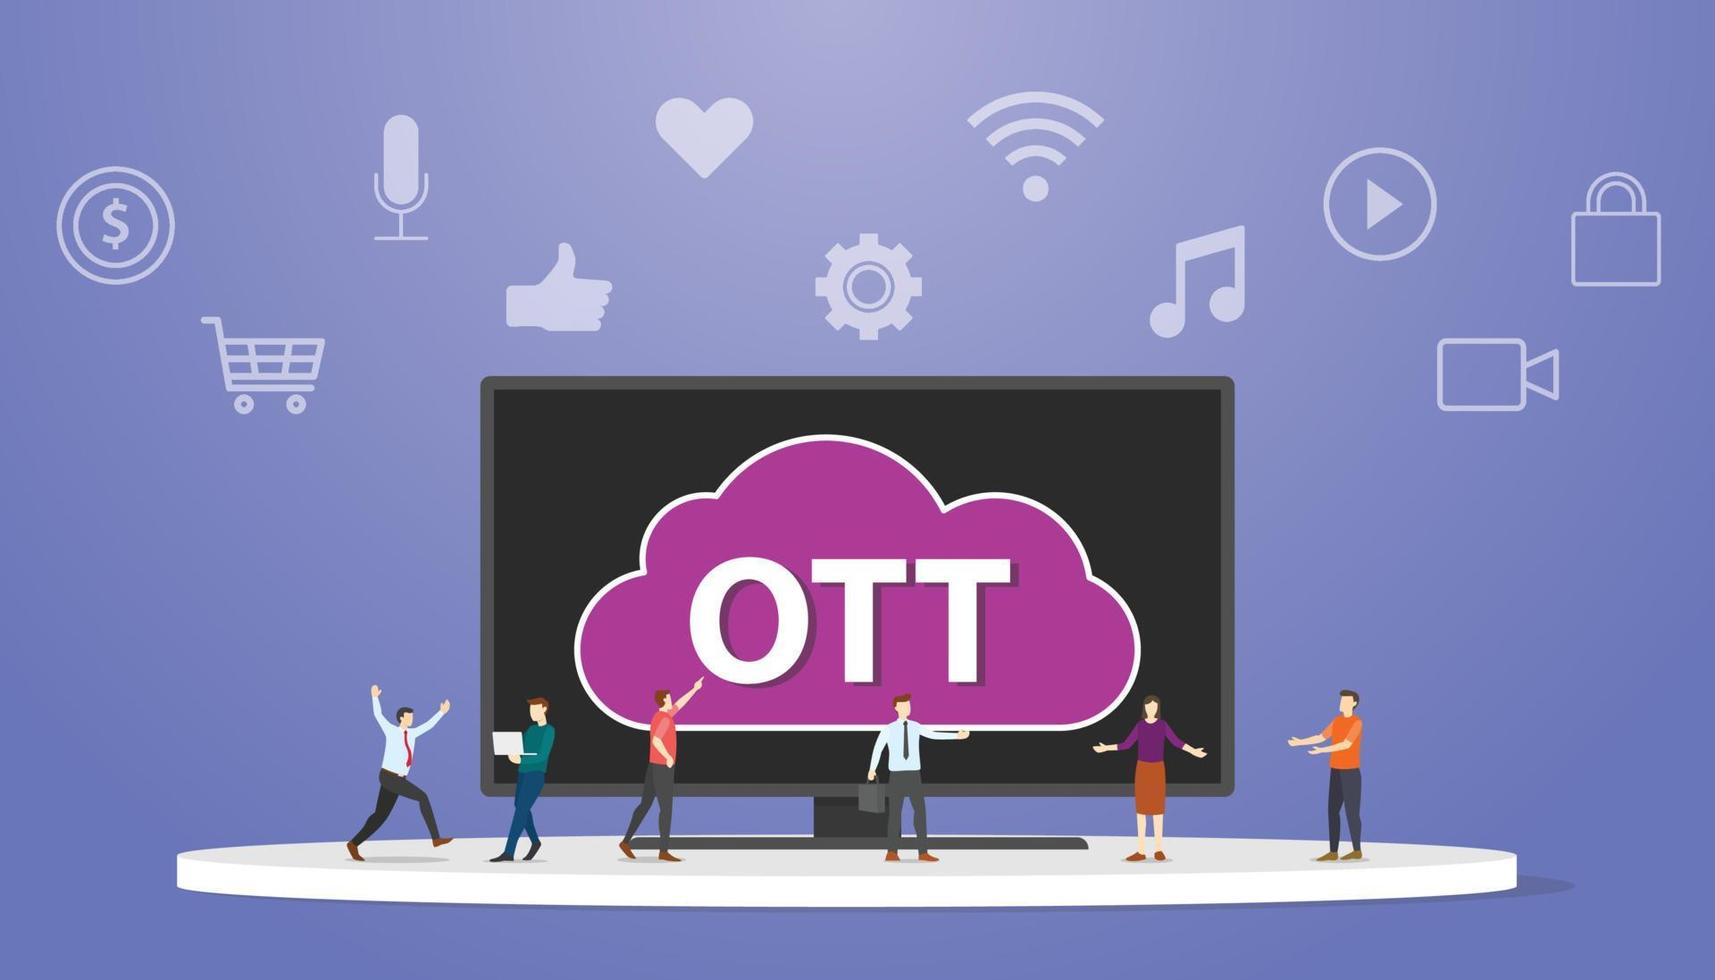 ott over the top platform service concept with people around smart tv modern flat style vector